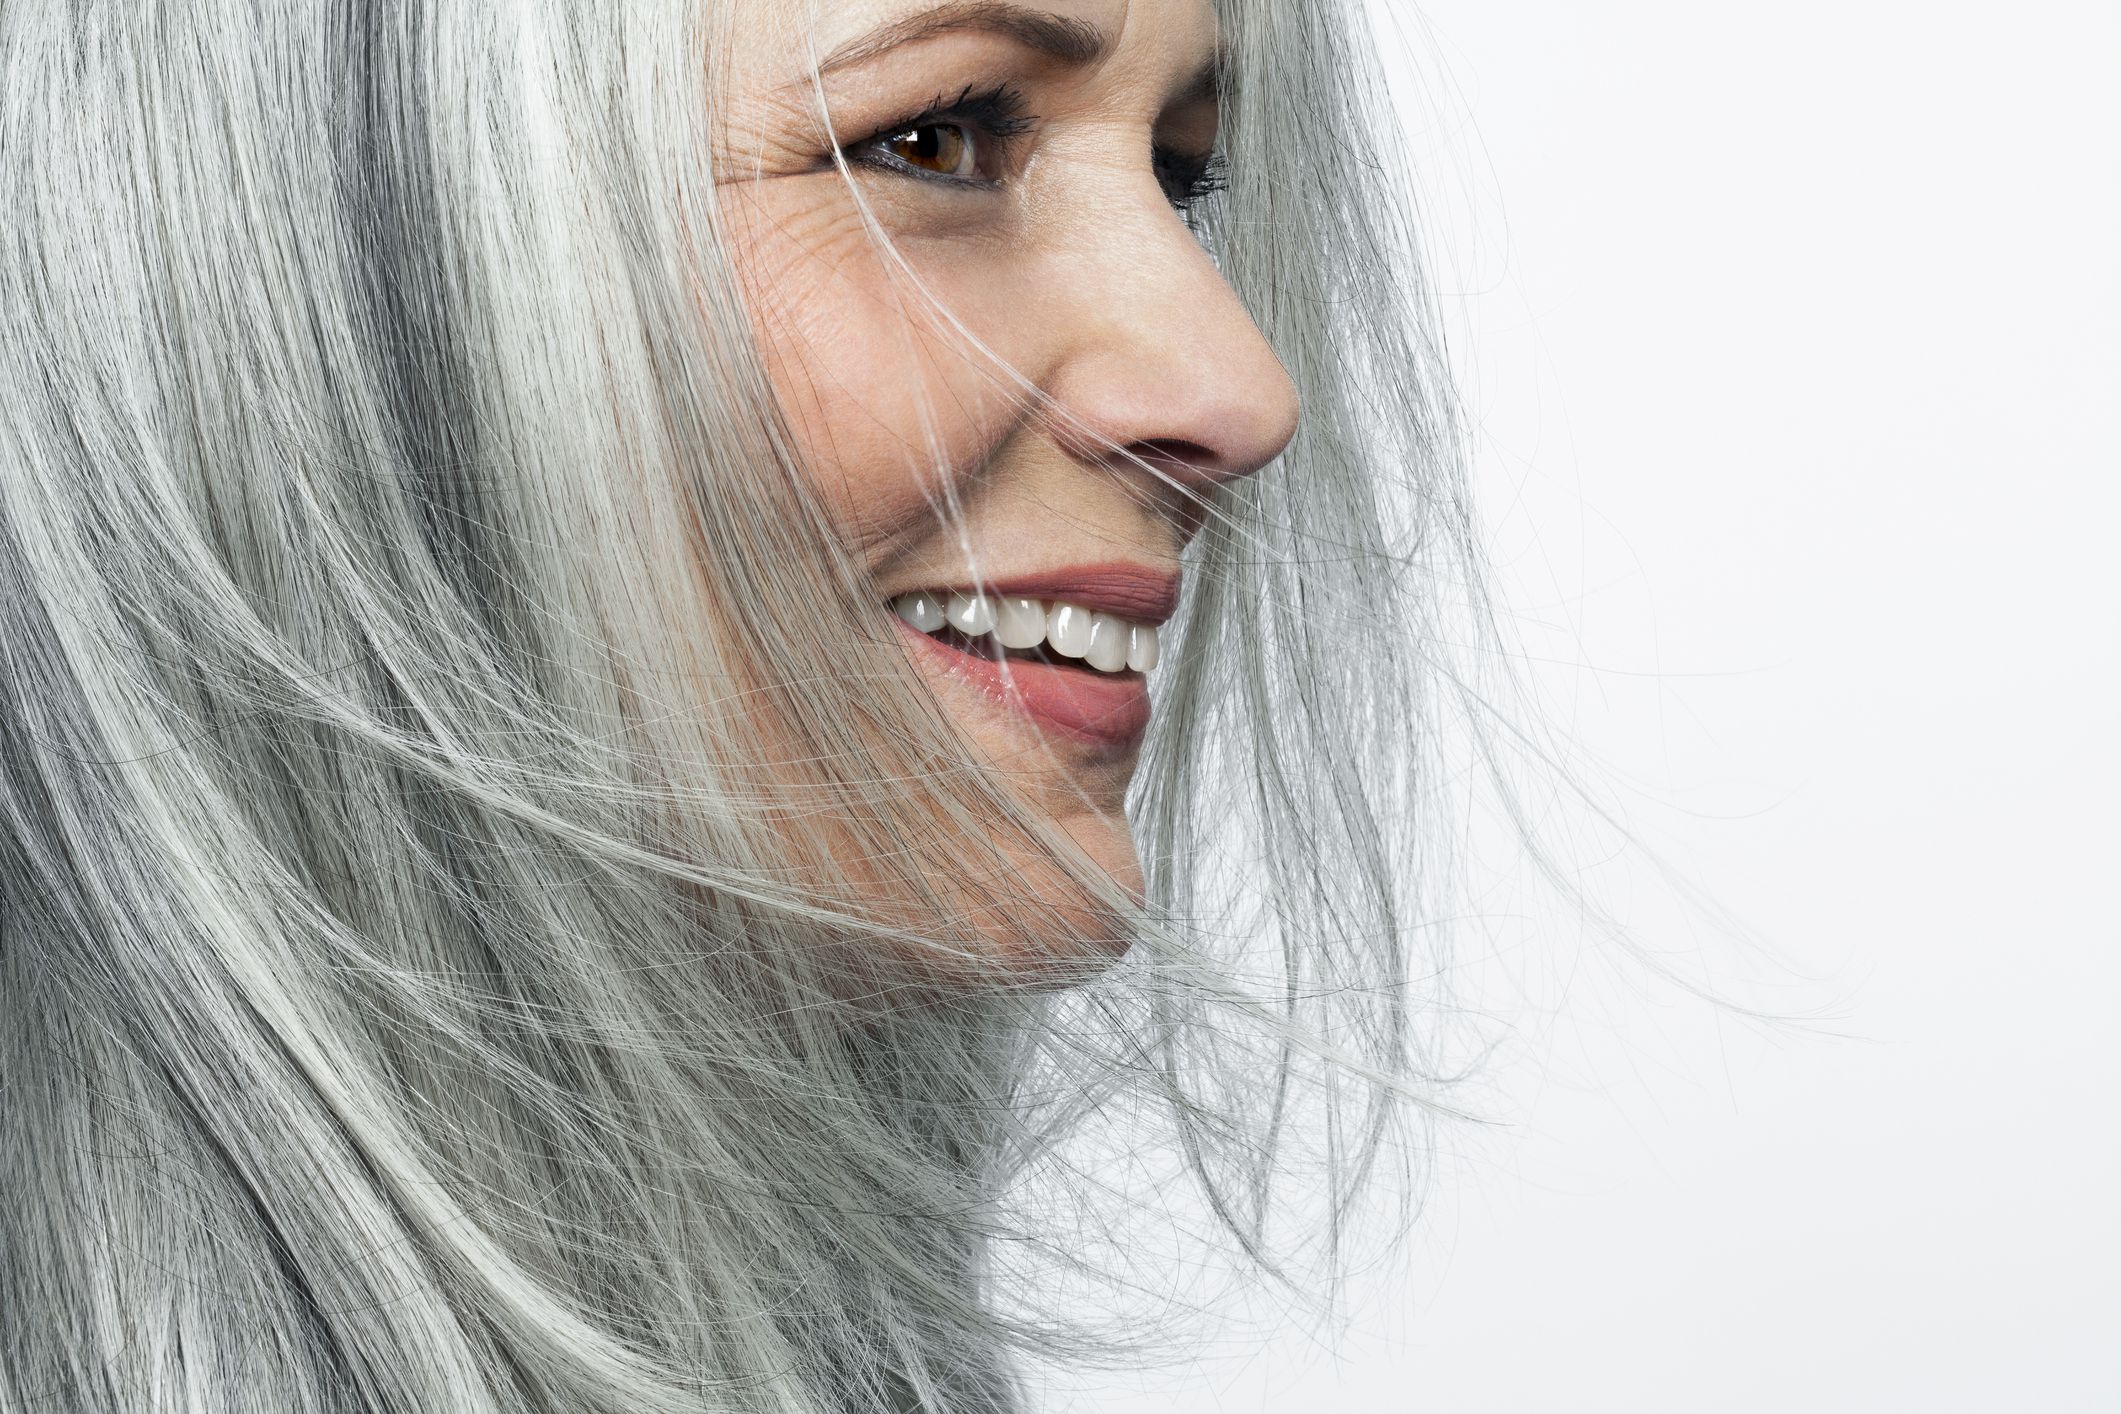 Premature-gray-hair-Heres-how-to-get-rid-of-gray-hair-permanently-and-naturally.